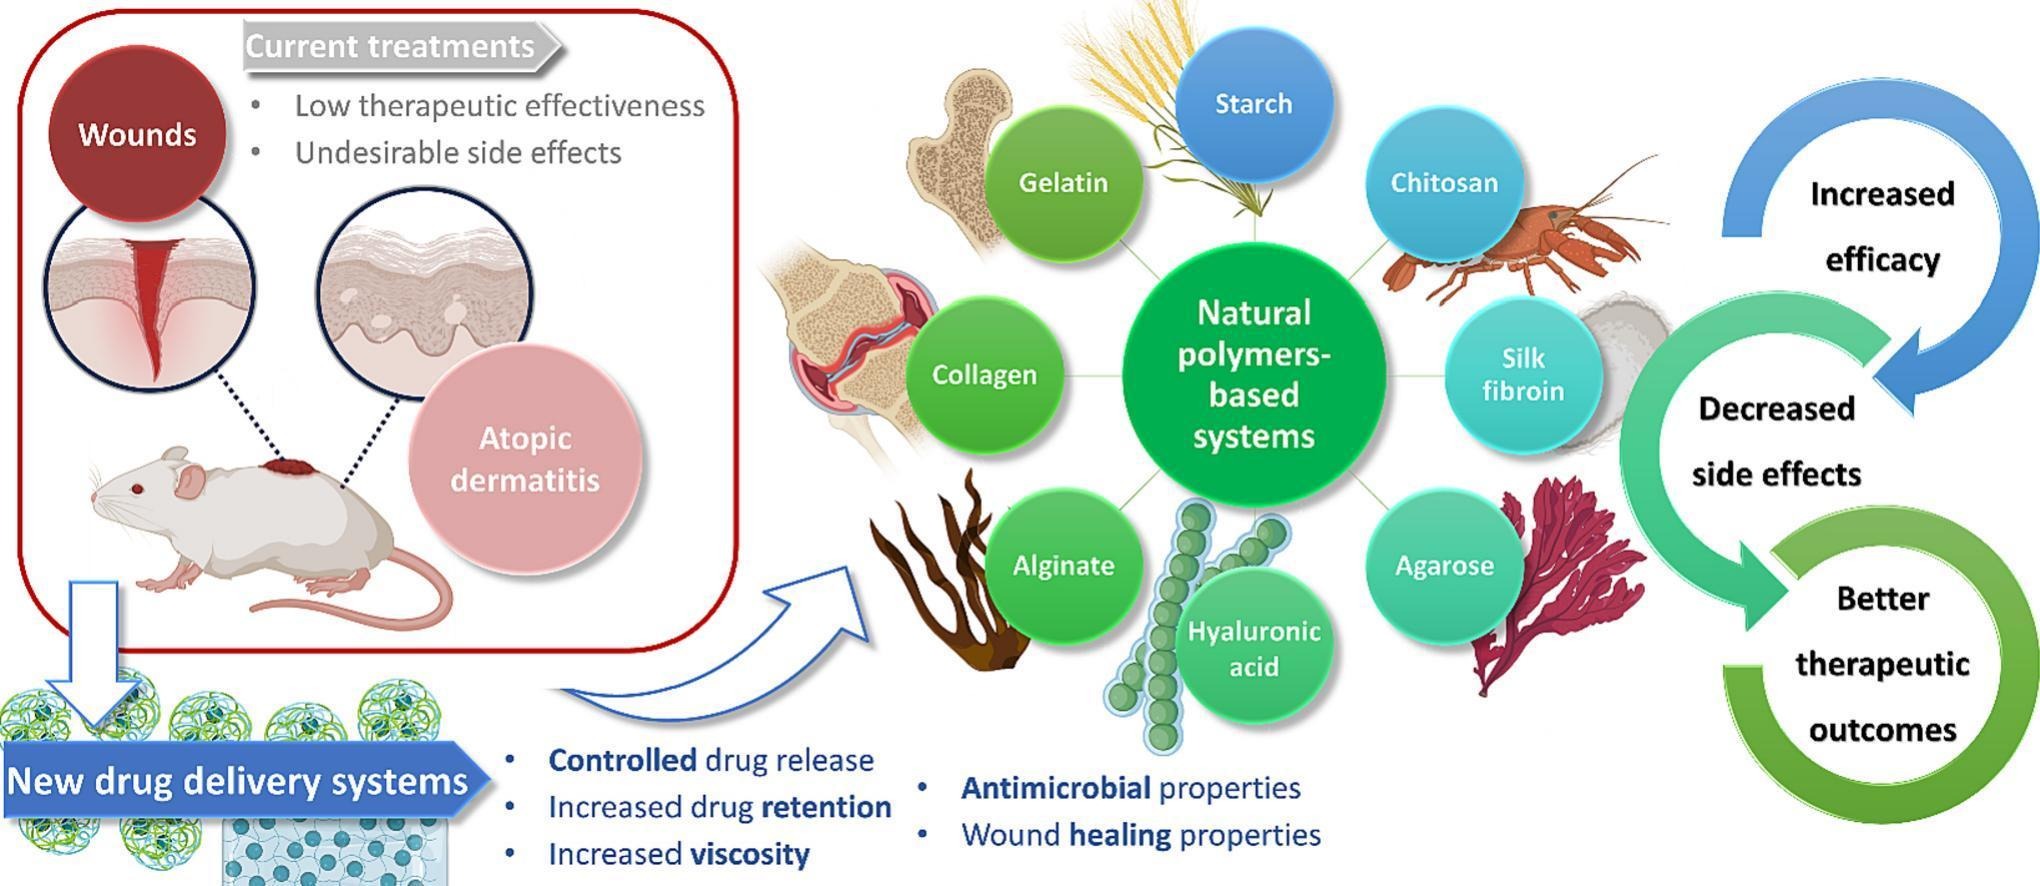 A review on natural biopolymers in external drug delivery systems for wound healing and atopic dermatitis